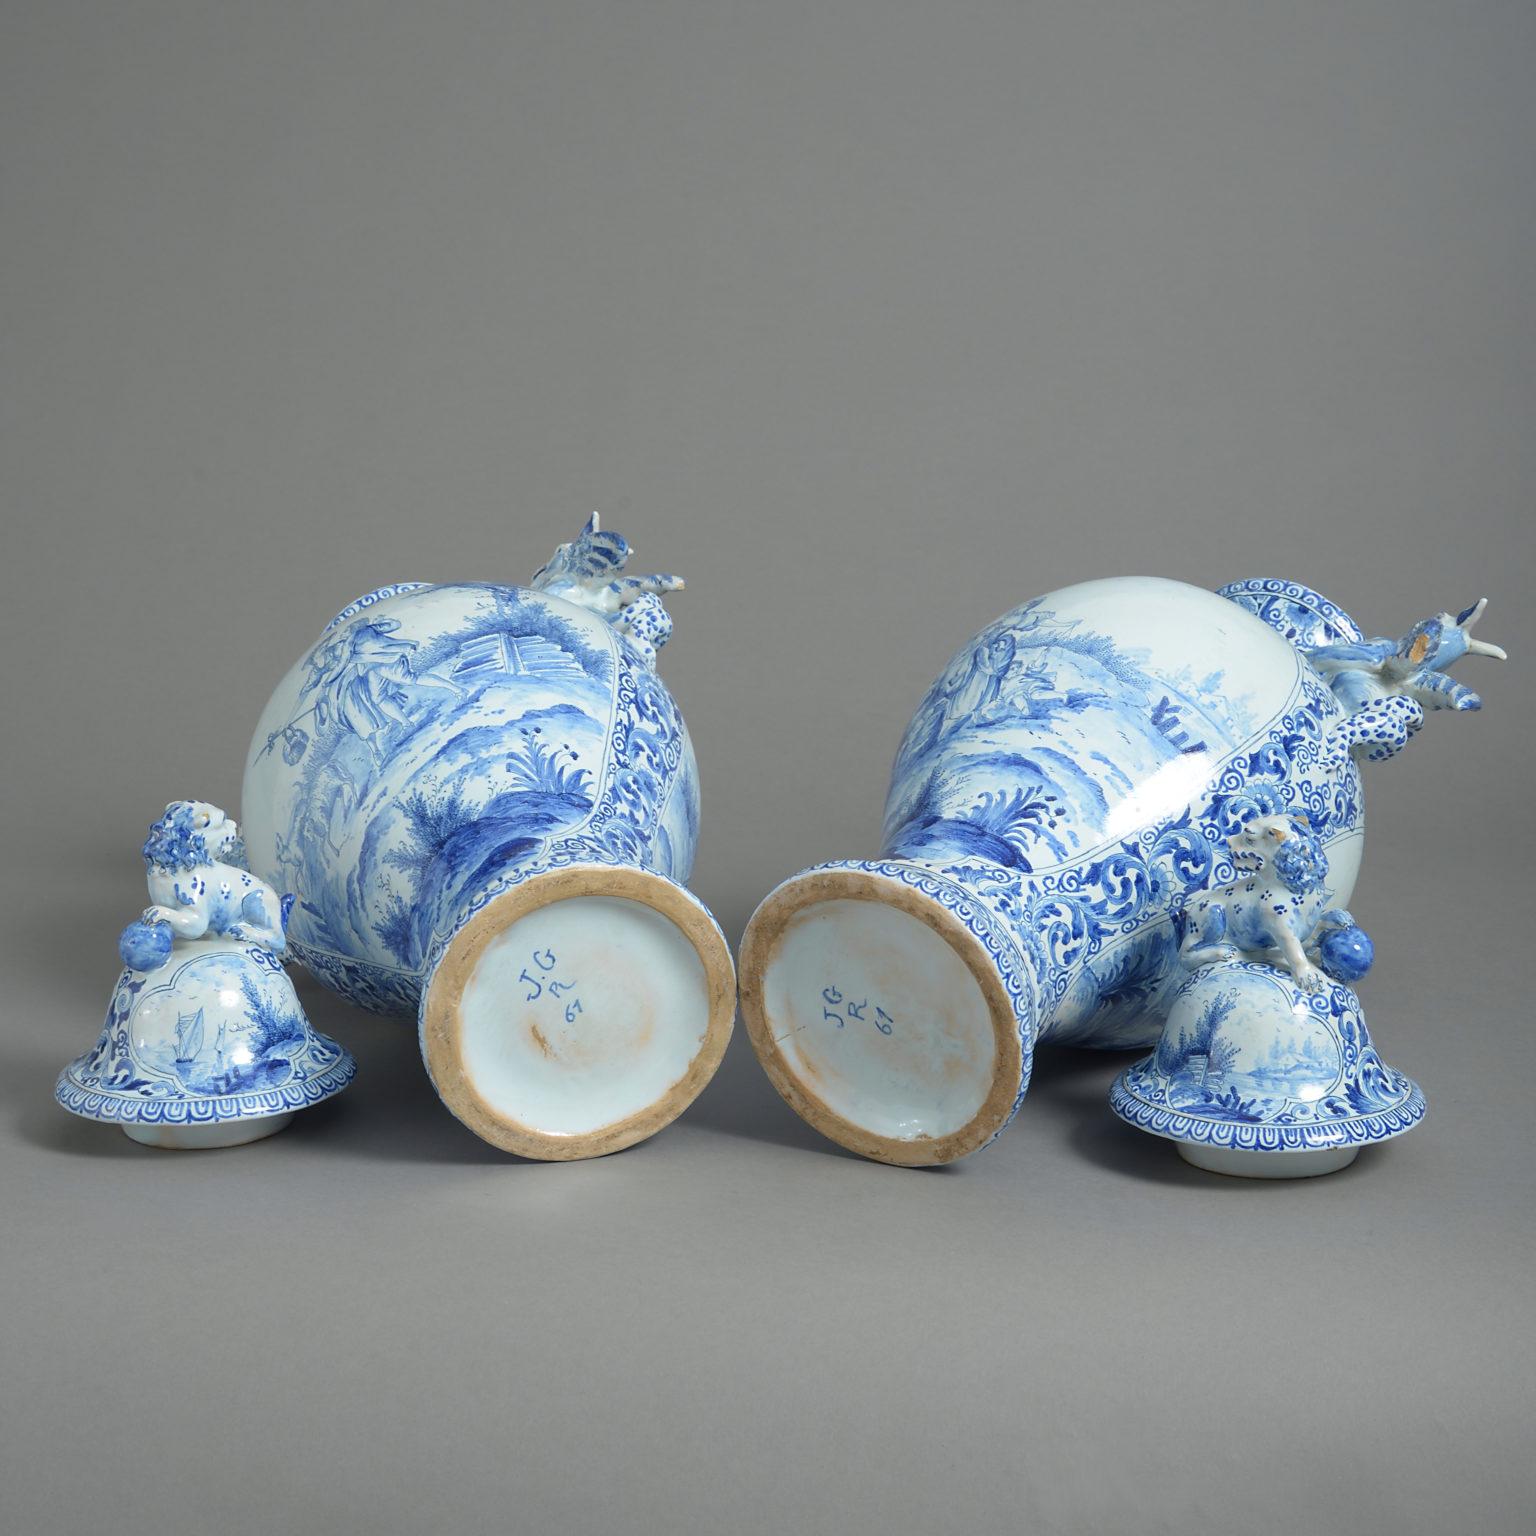 20th Century Large Pair of Blue & White Delft Pottery Vases and Covers